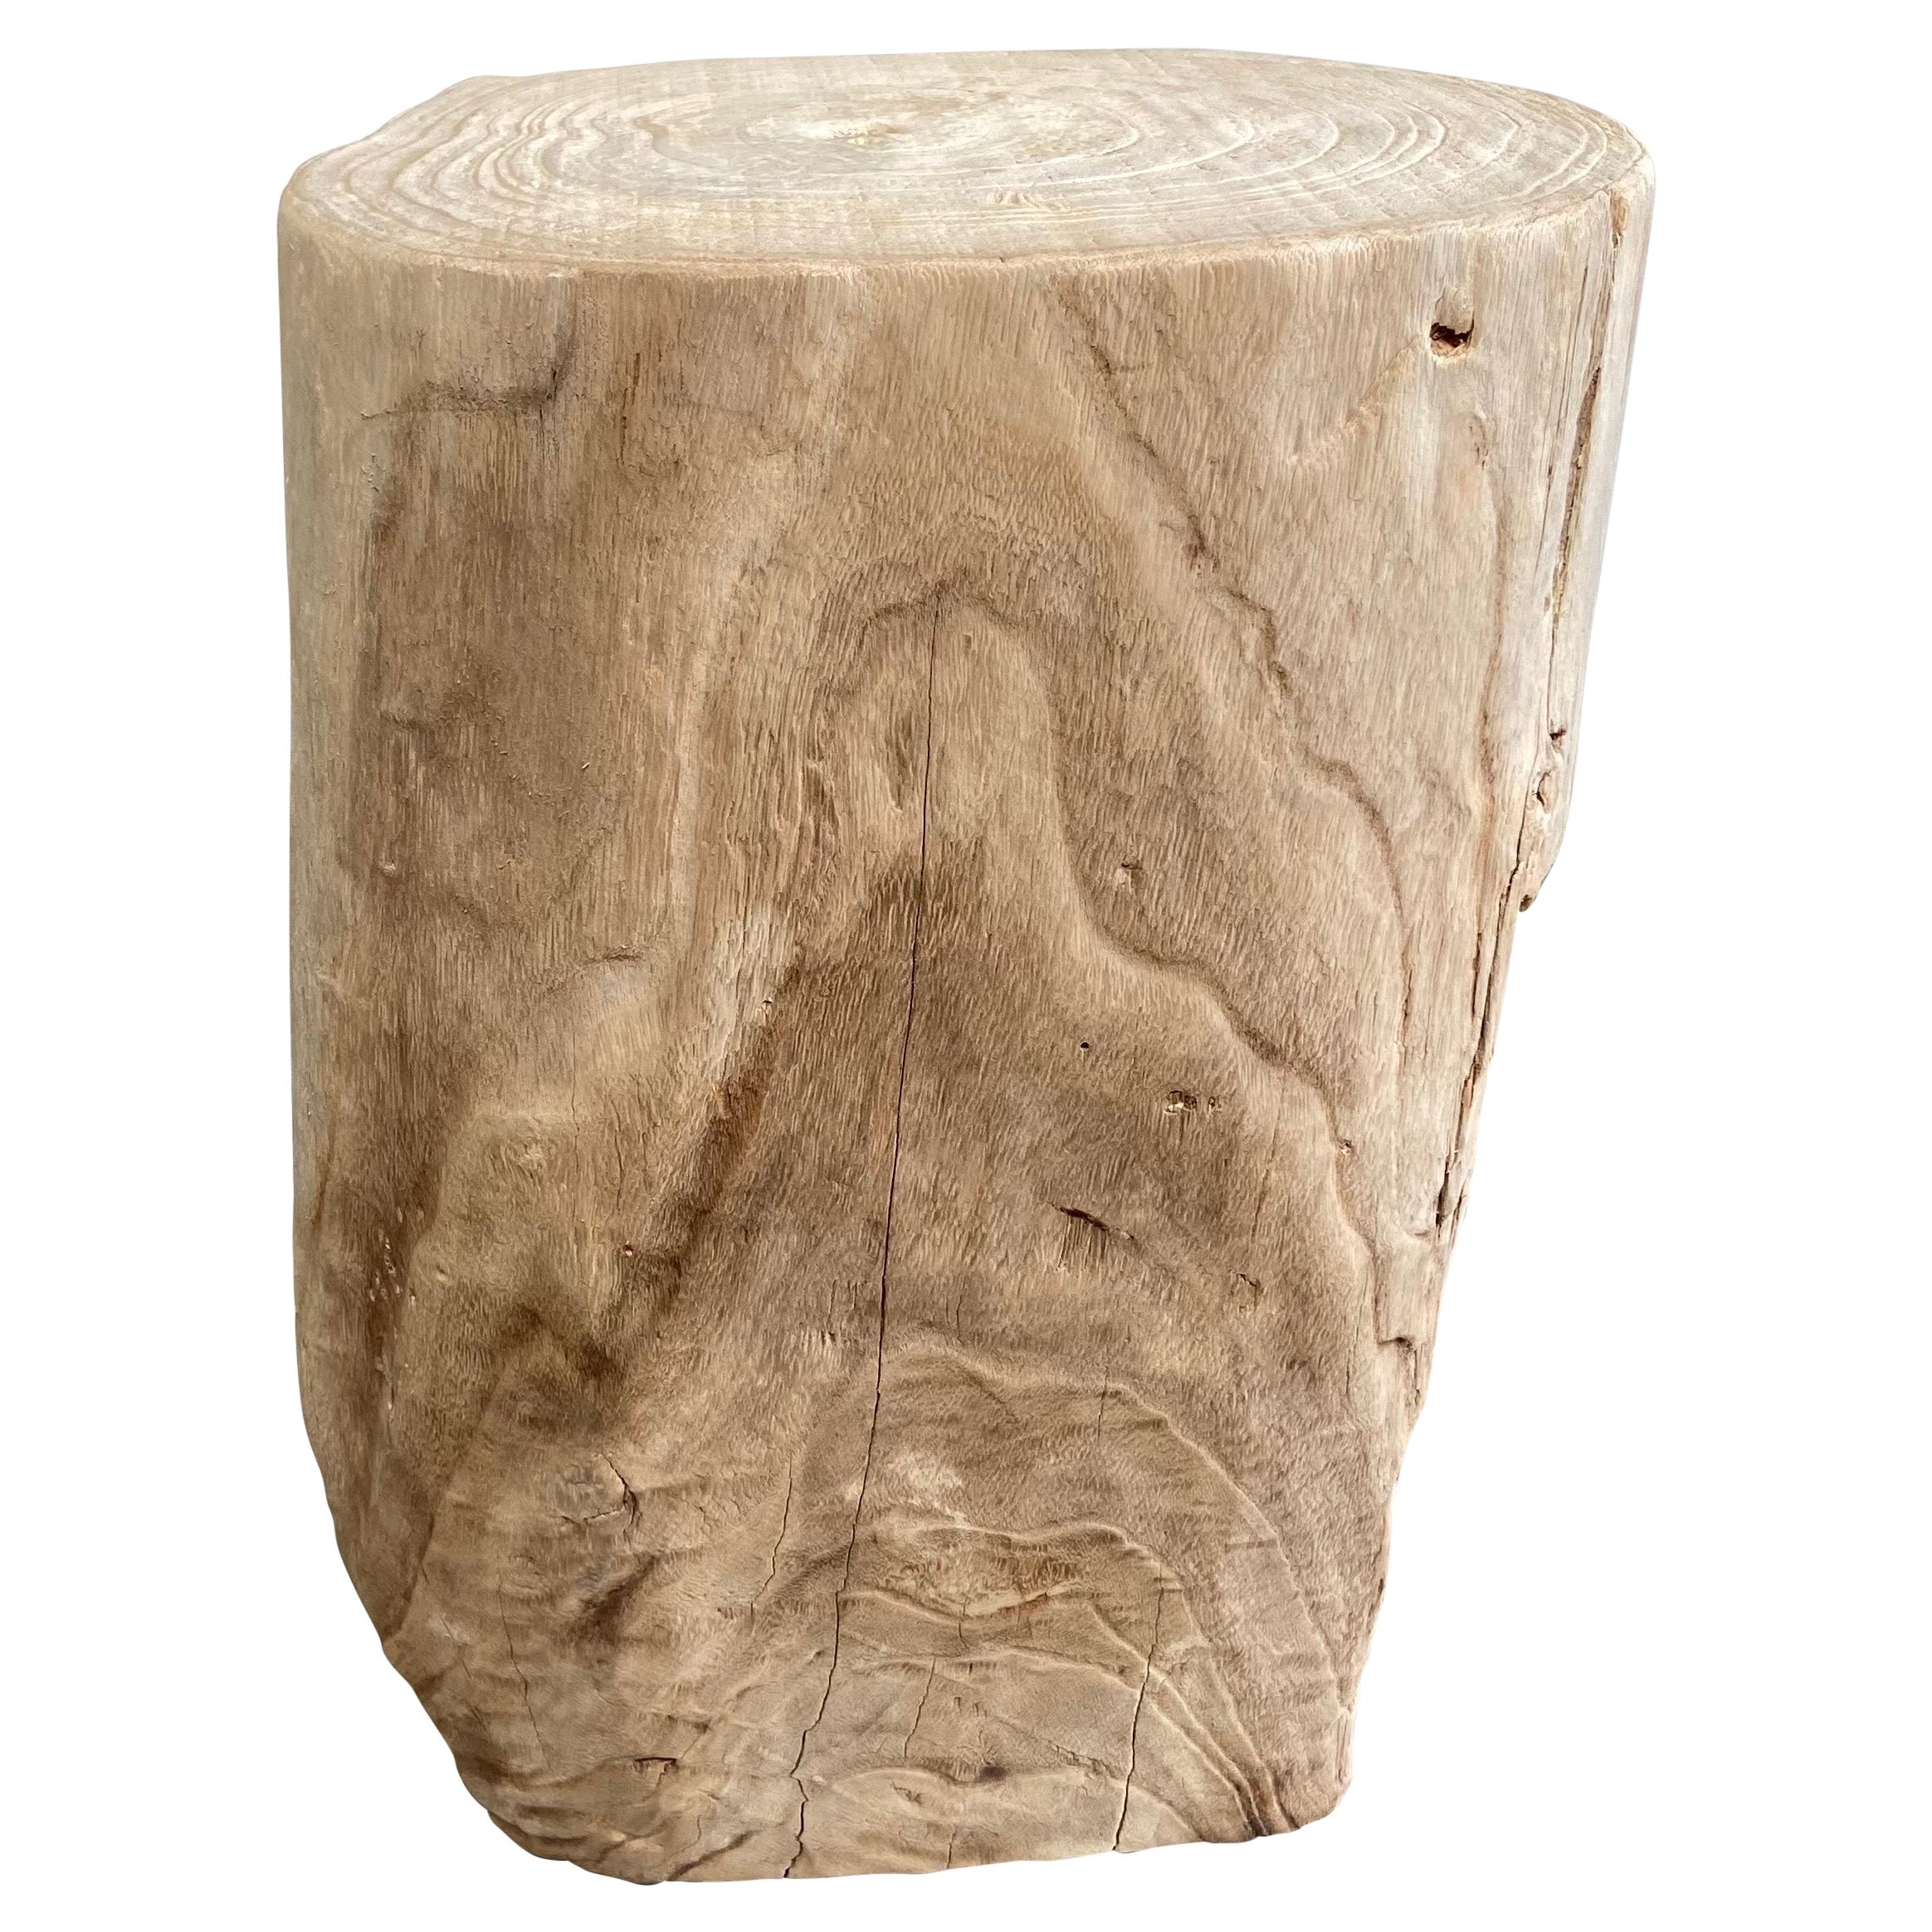 Natural Wood Side Table or Stool